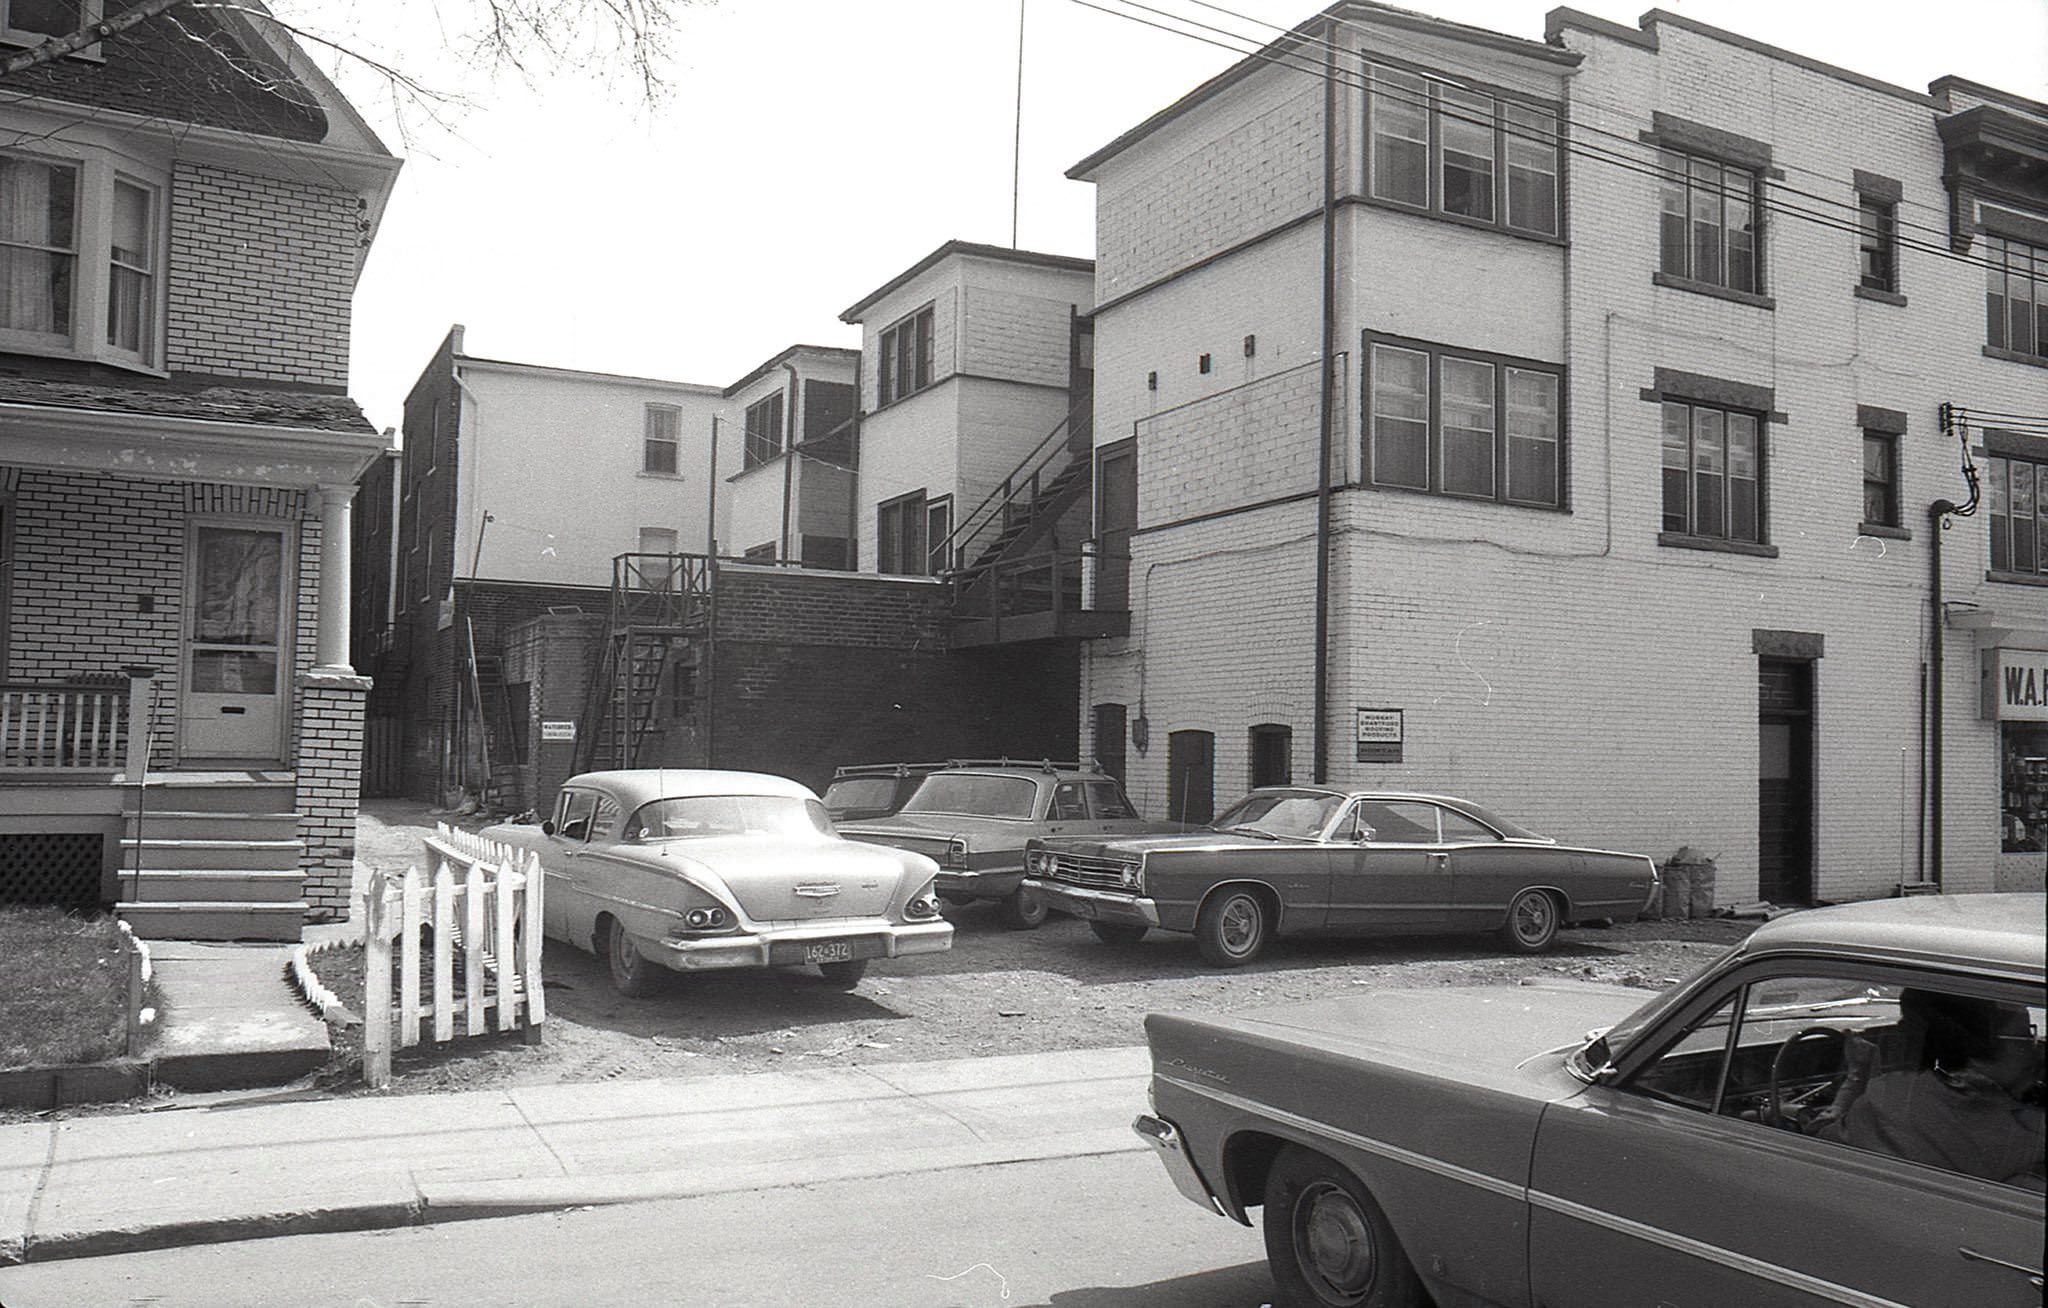 The laneway and parking behind Ferriers block, 526 - 536 Danforth Ave., 1969. Looking east from Ferrier Avenue.